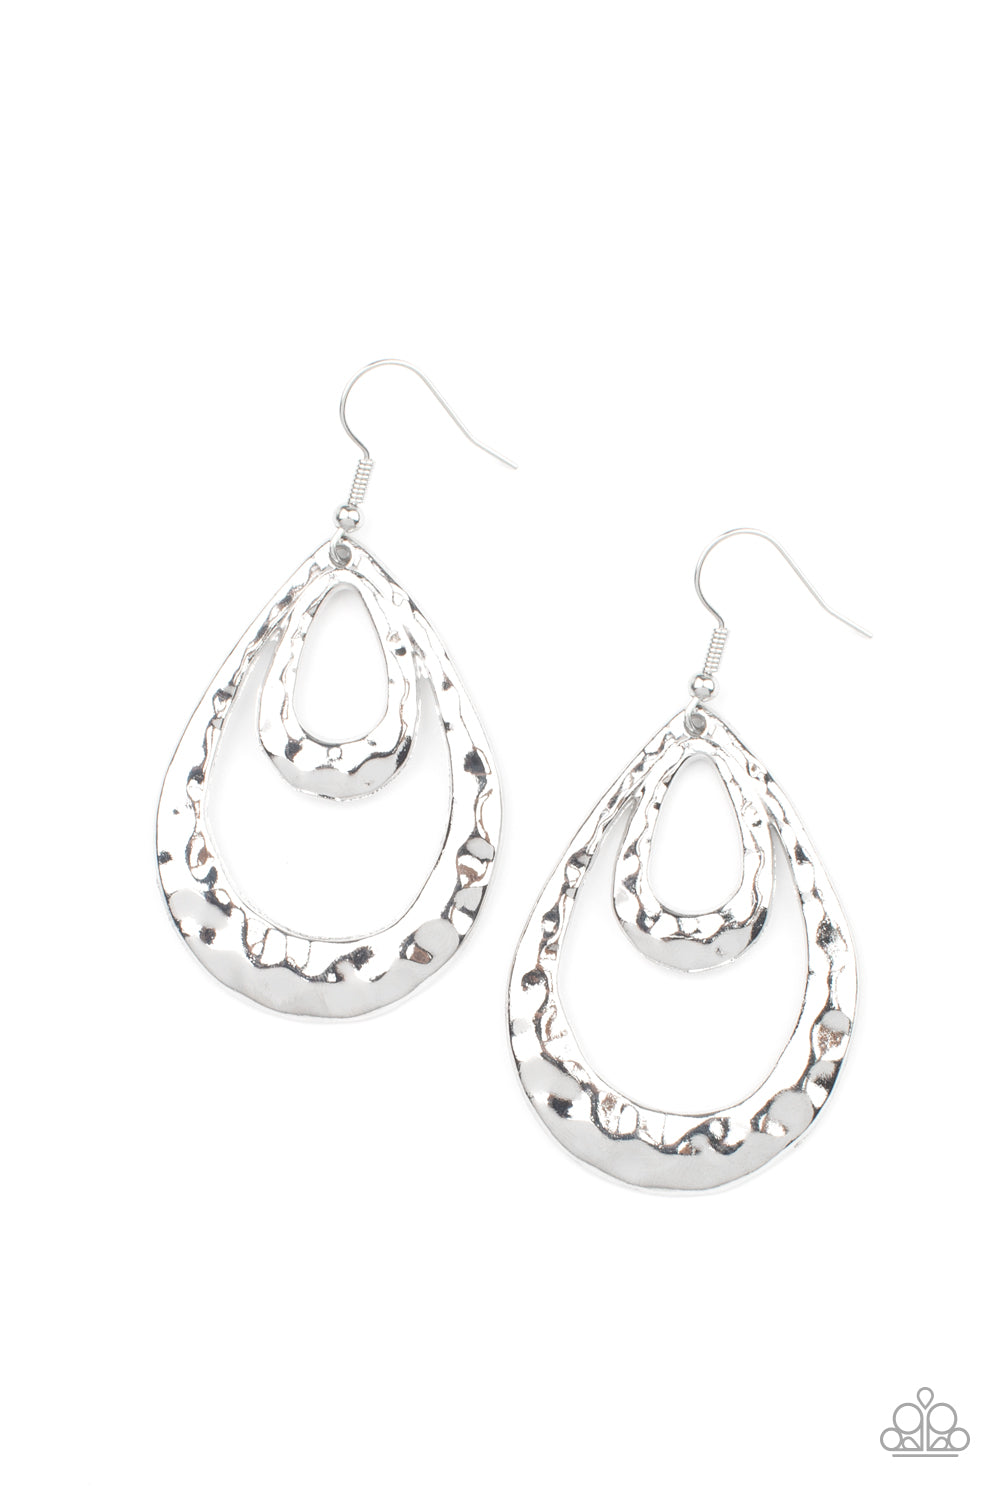 Museum Muse - silver - Paparazzi earrings